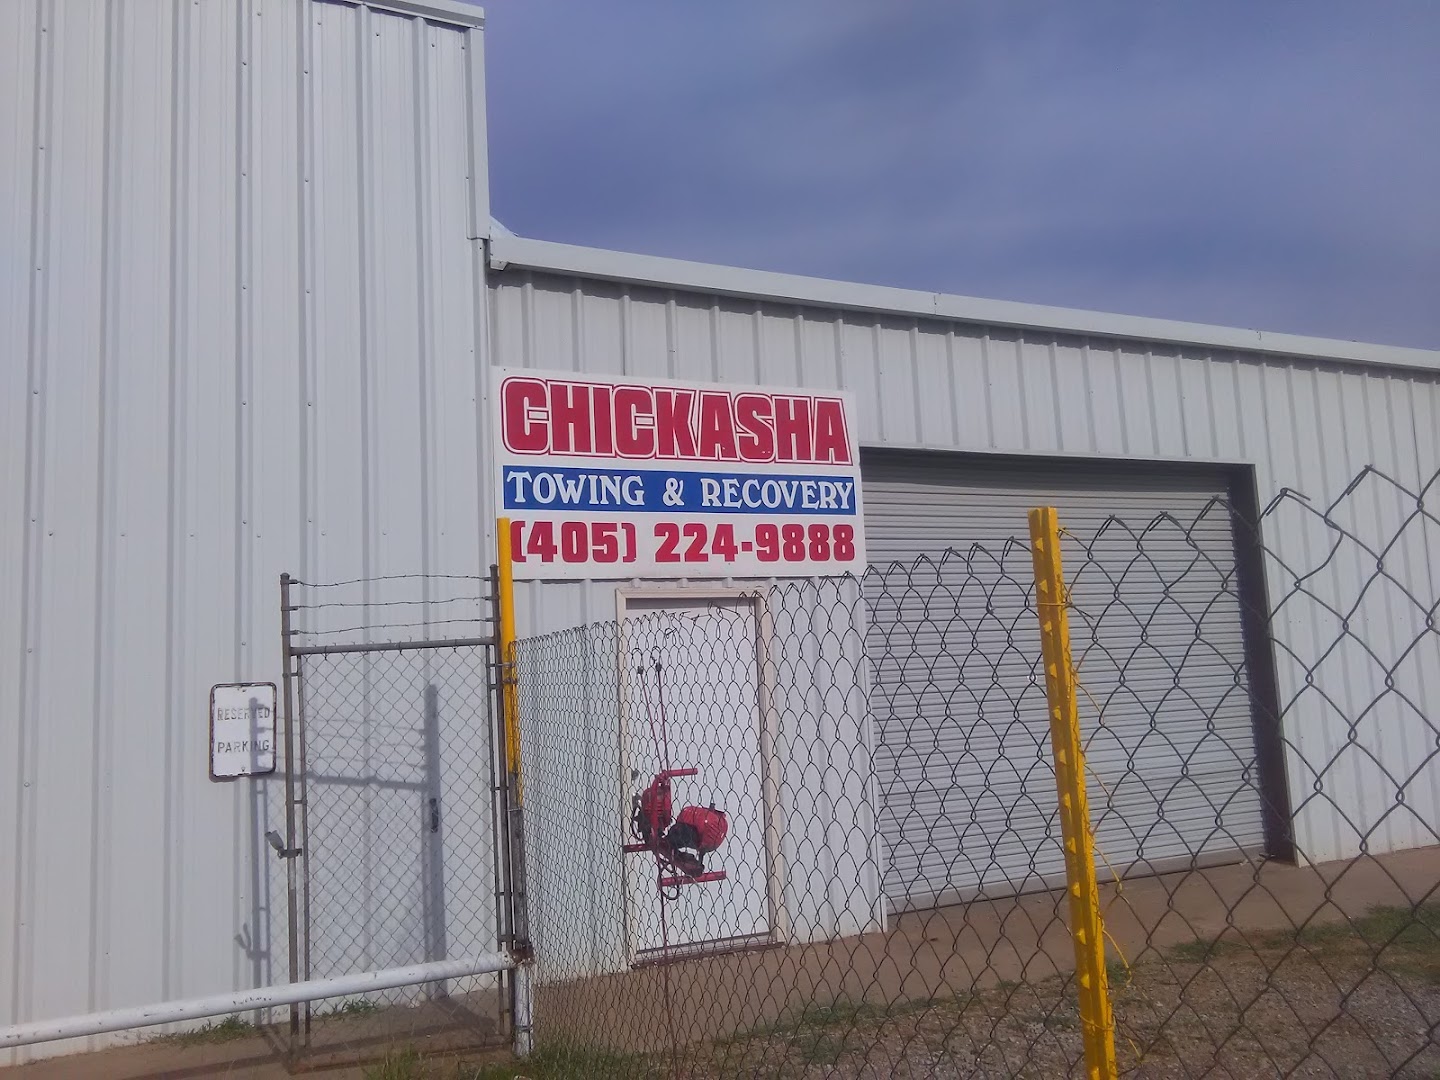 Used auto parts store In Chickasha OK 